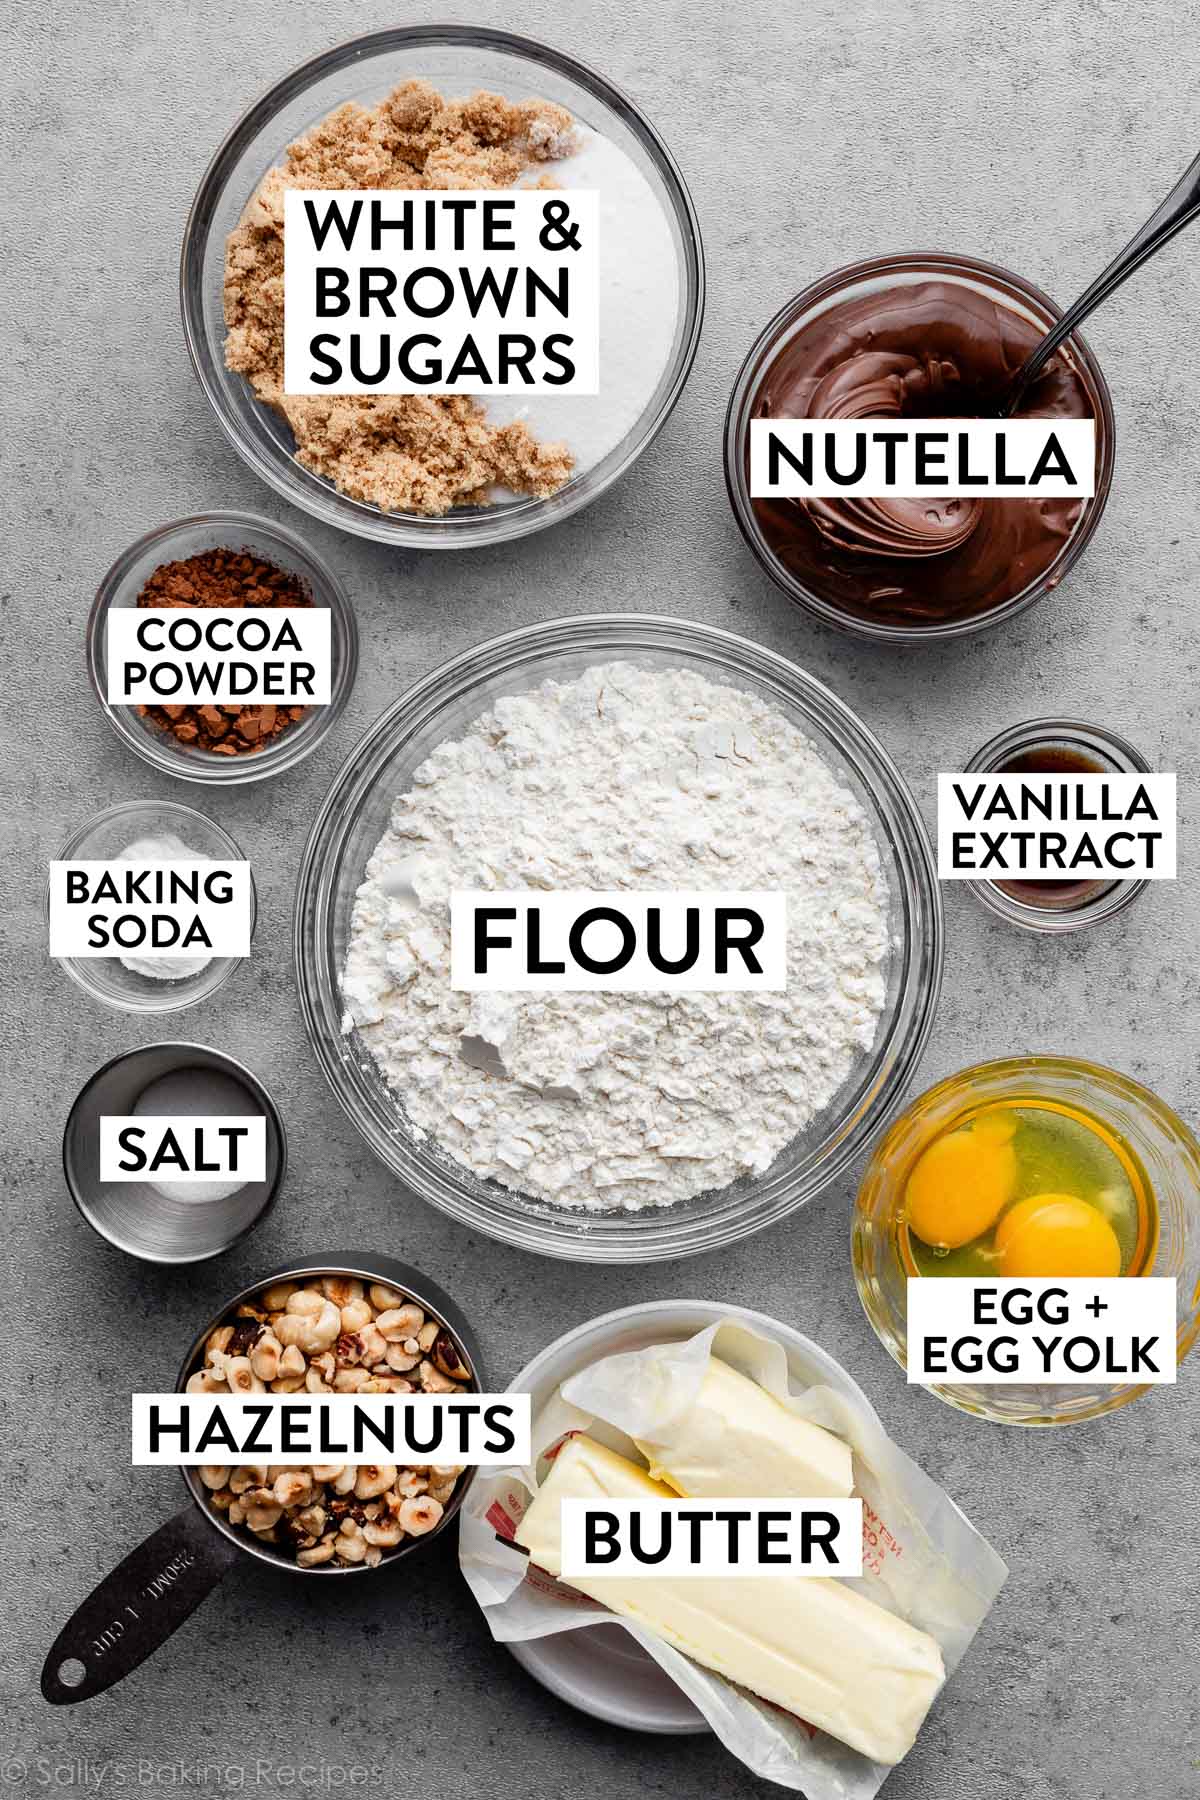 ingredients measured out and on gray surface including flour, Nutella, egg and egg yolk, baking soda, hazelnuts, vanilla extract, and butter.